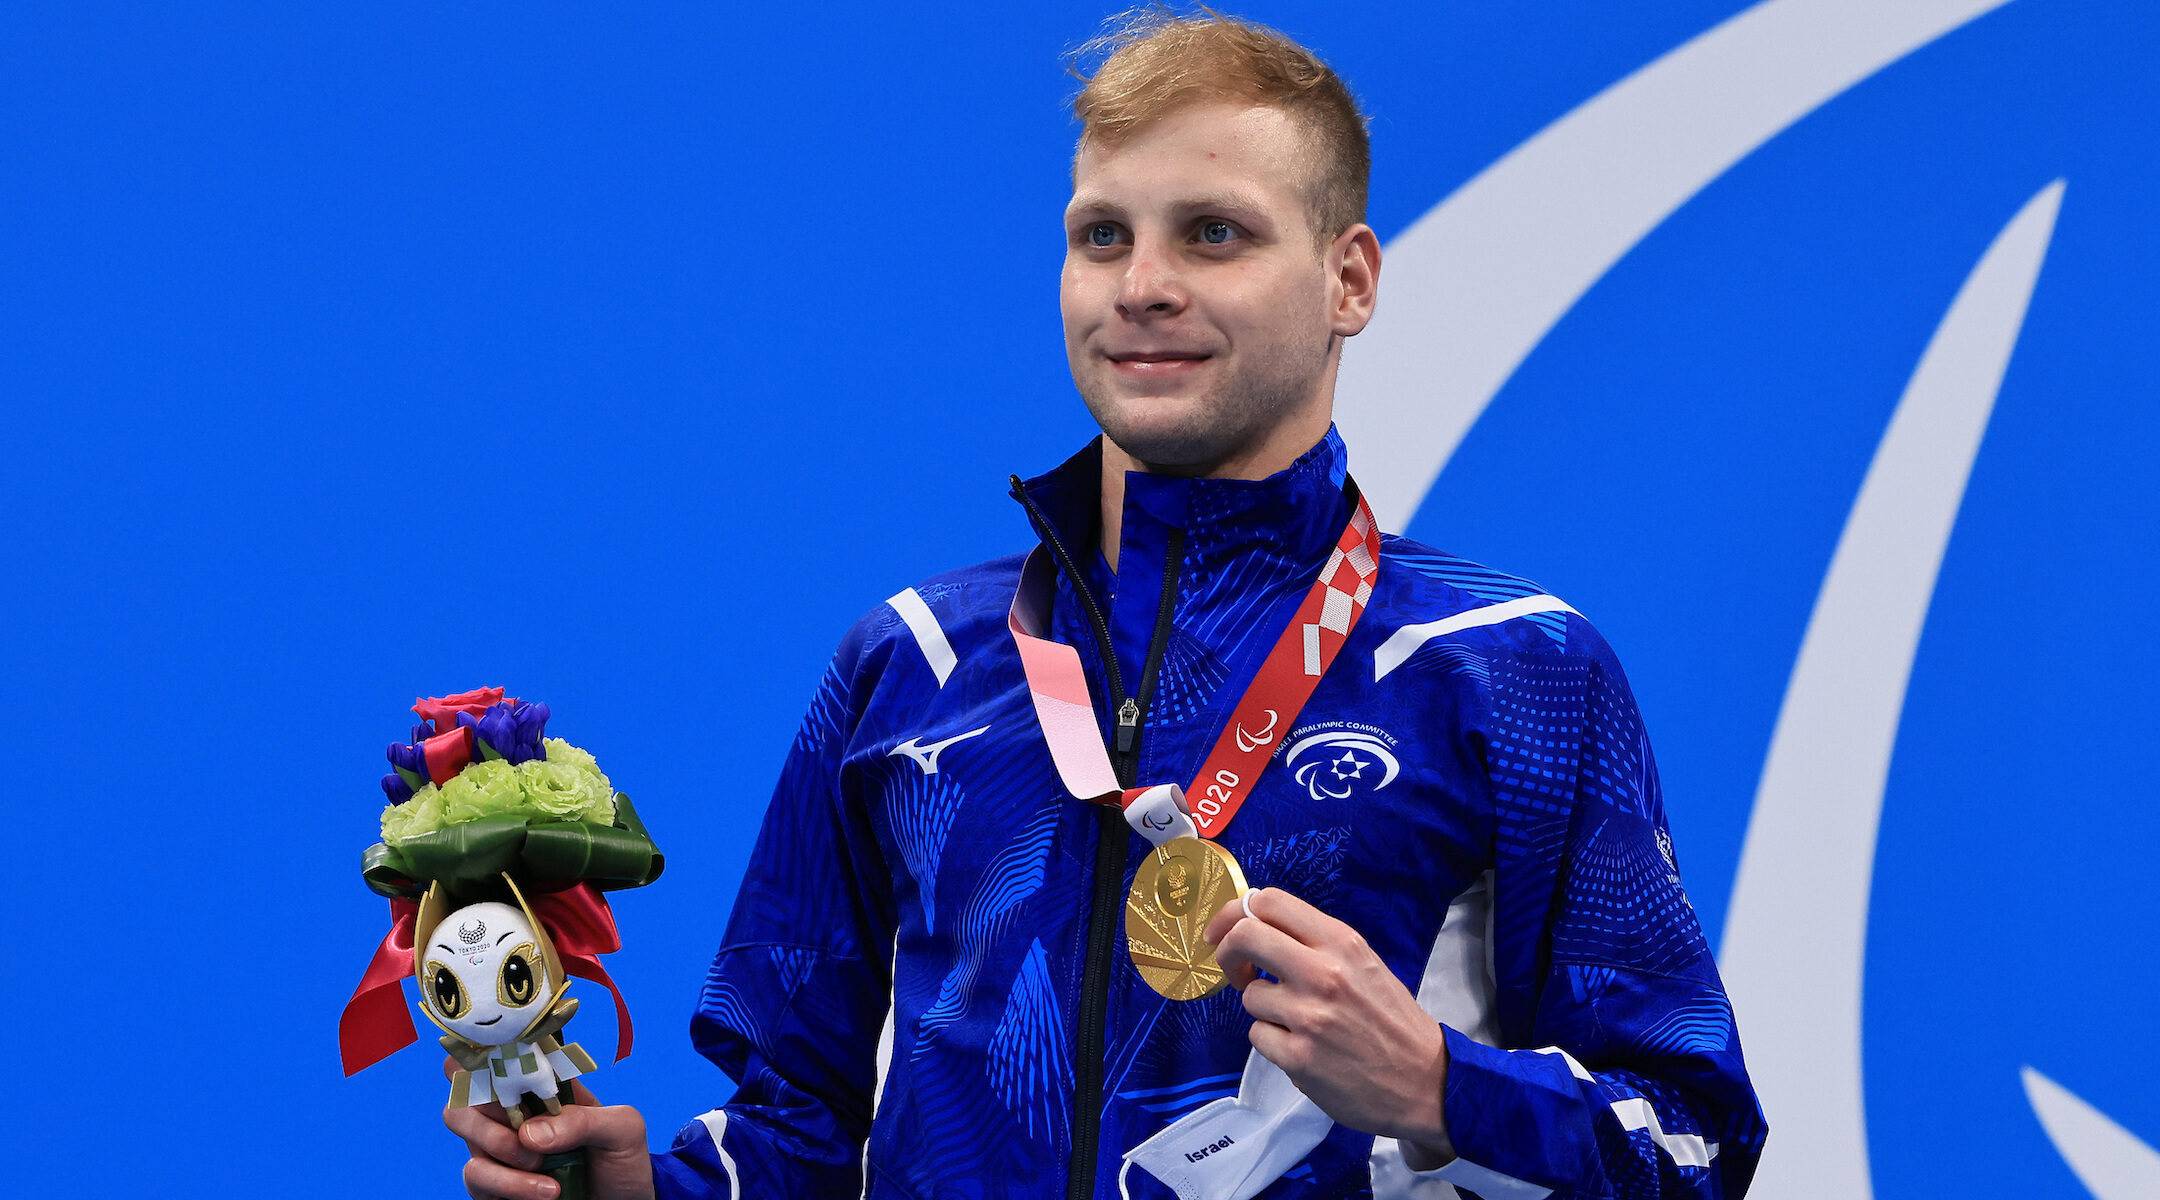 Mark Malyar poses during a medal ceremony